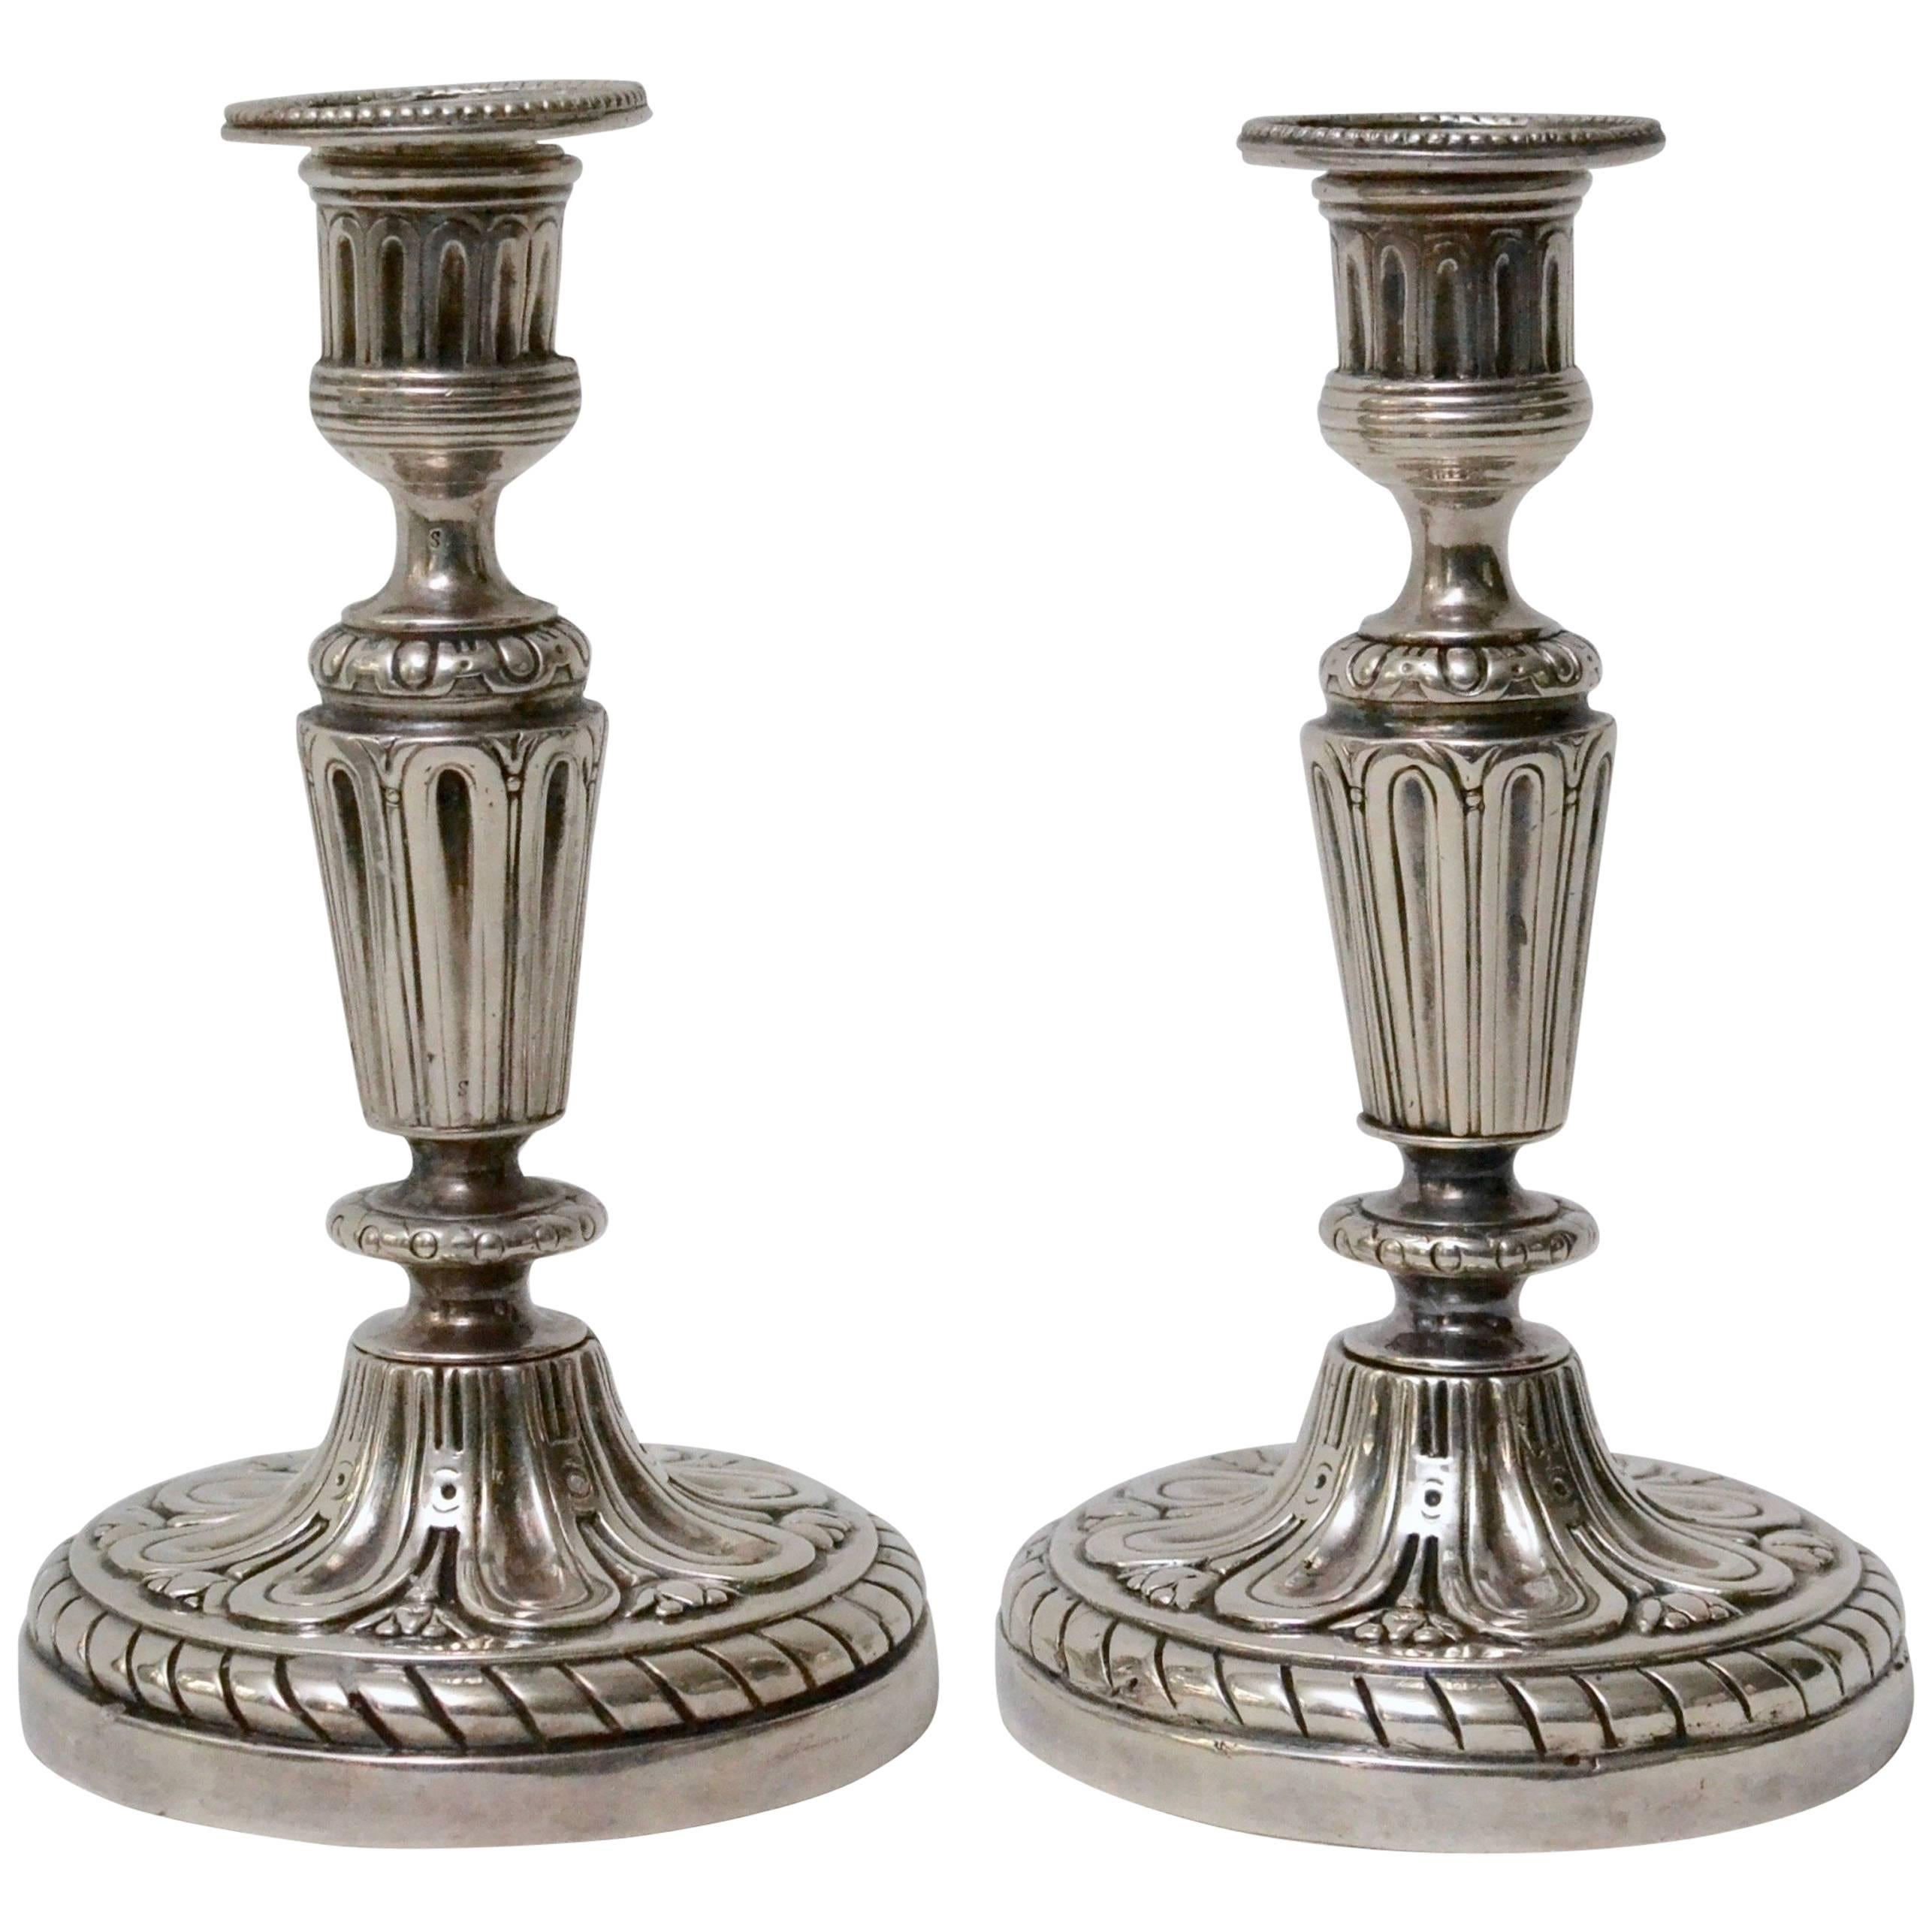 Pair of antique silver-plated Louis XVI candlesticks. 18th century